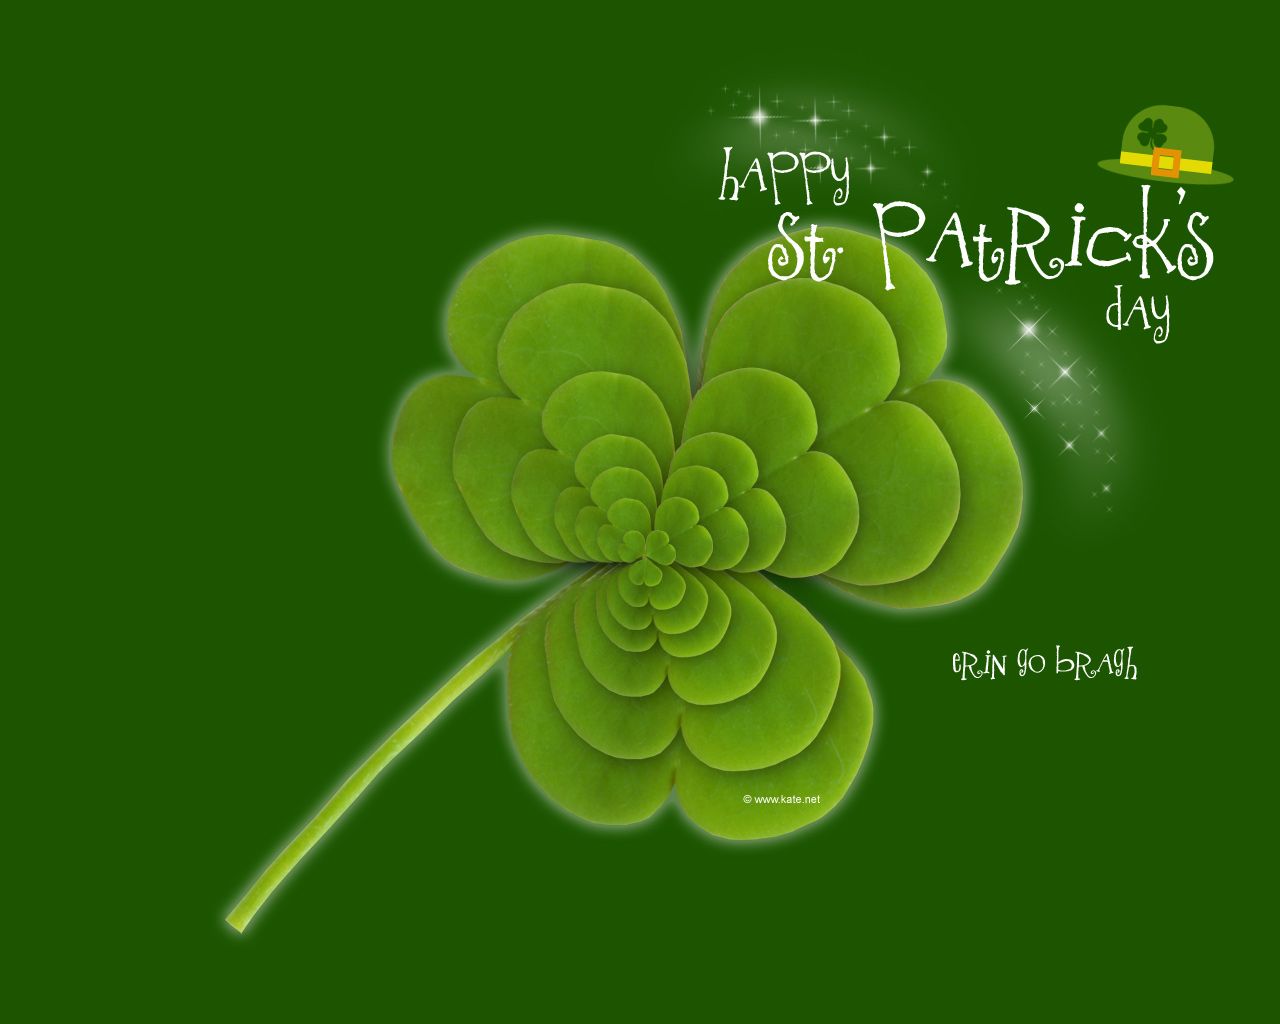 St. Patrick's Day Wallpapers by Kate.net